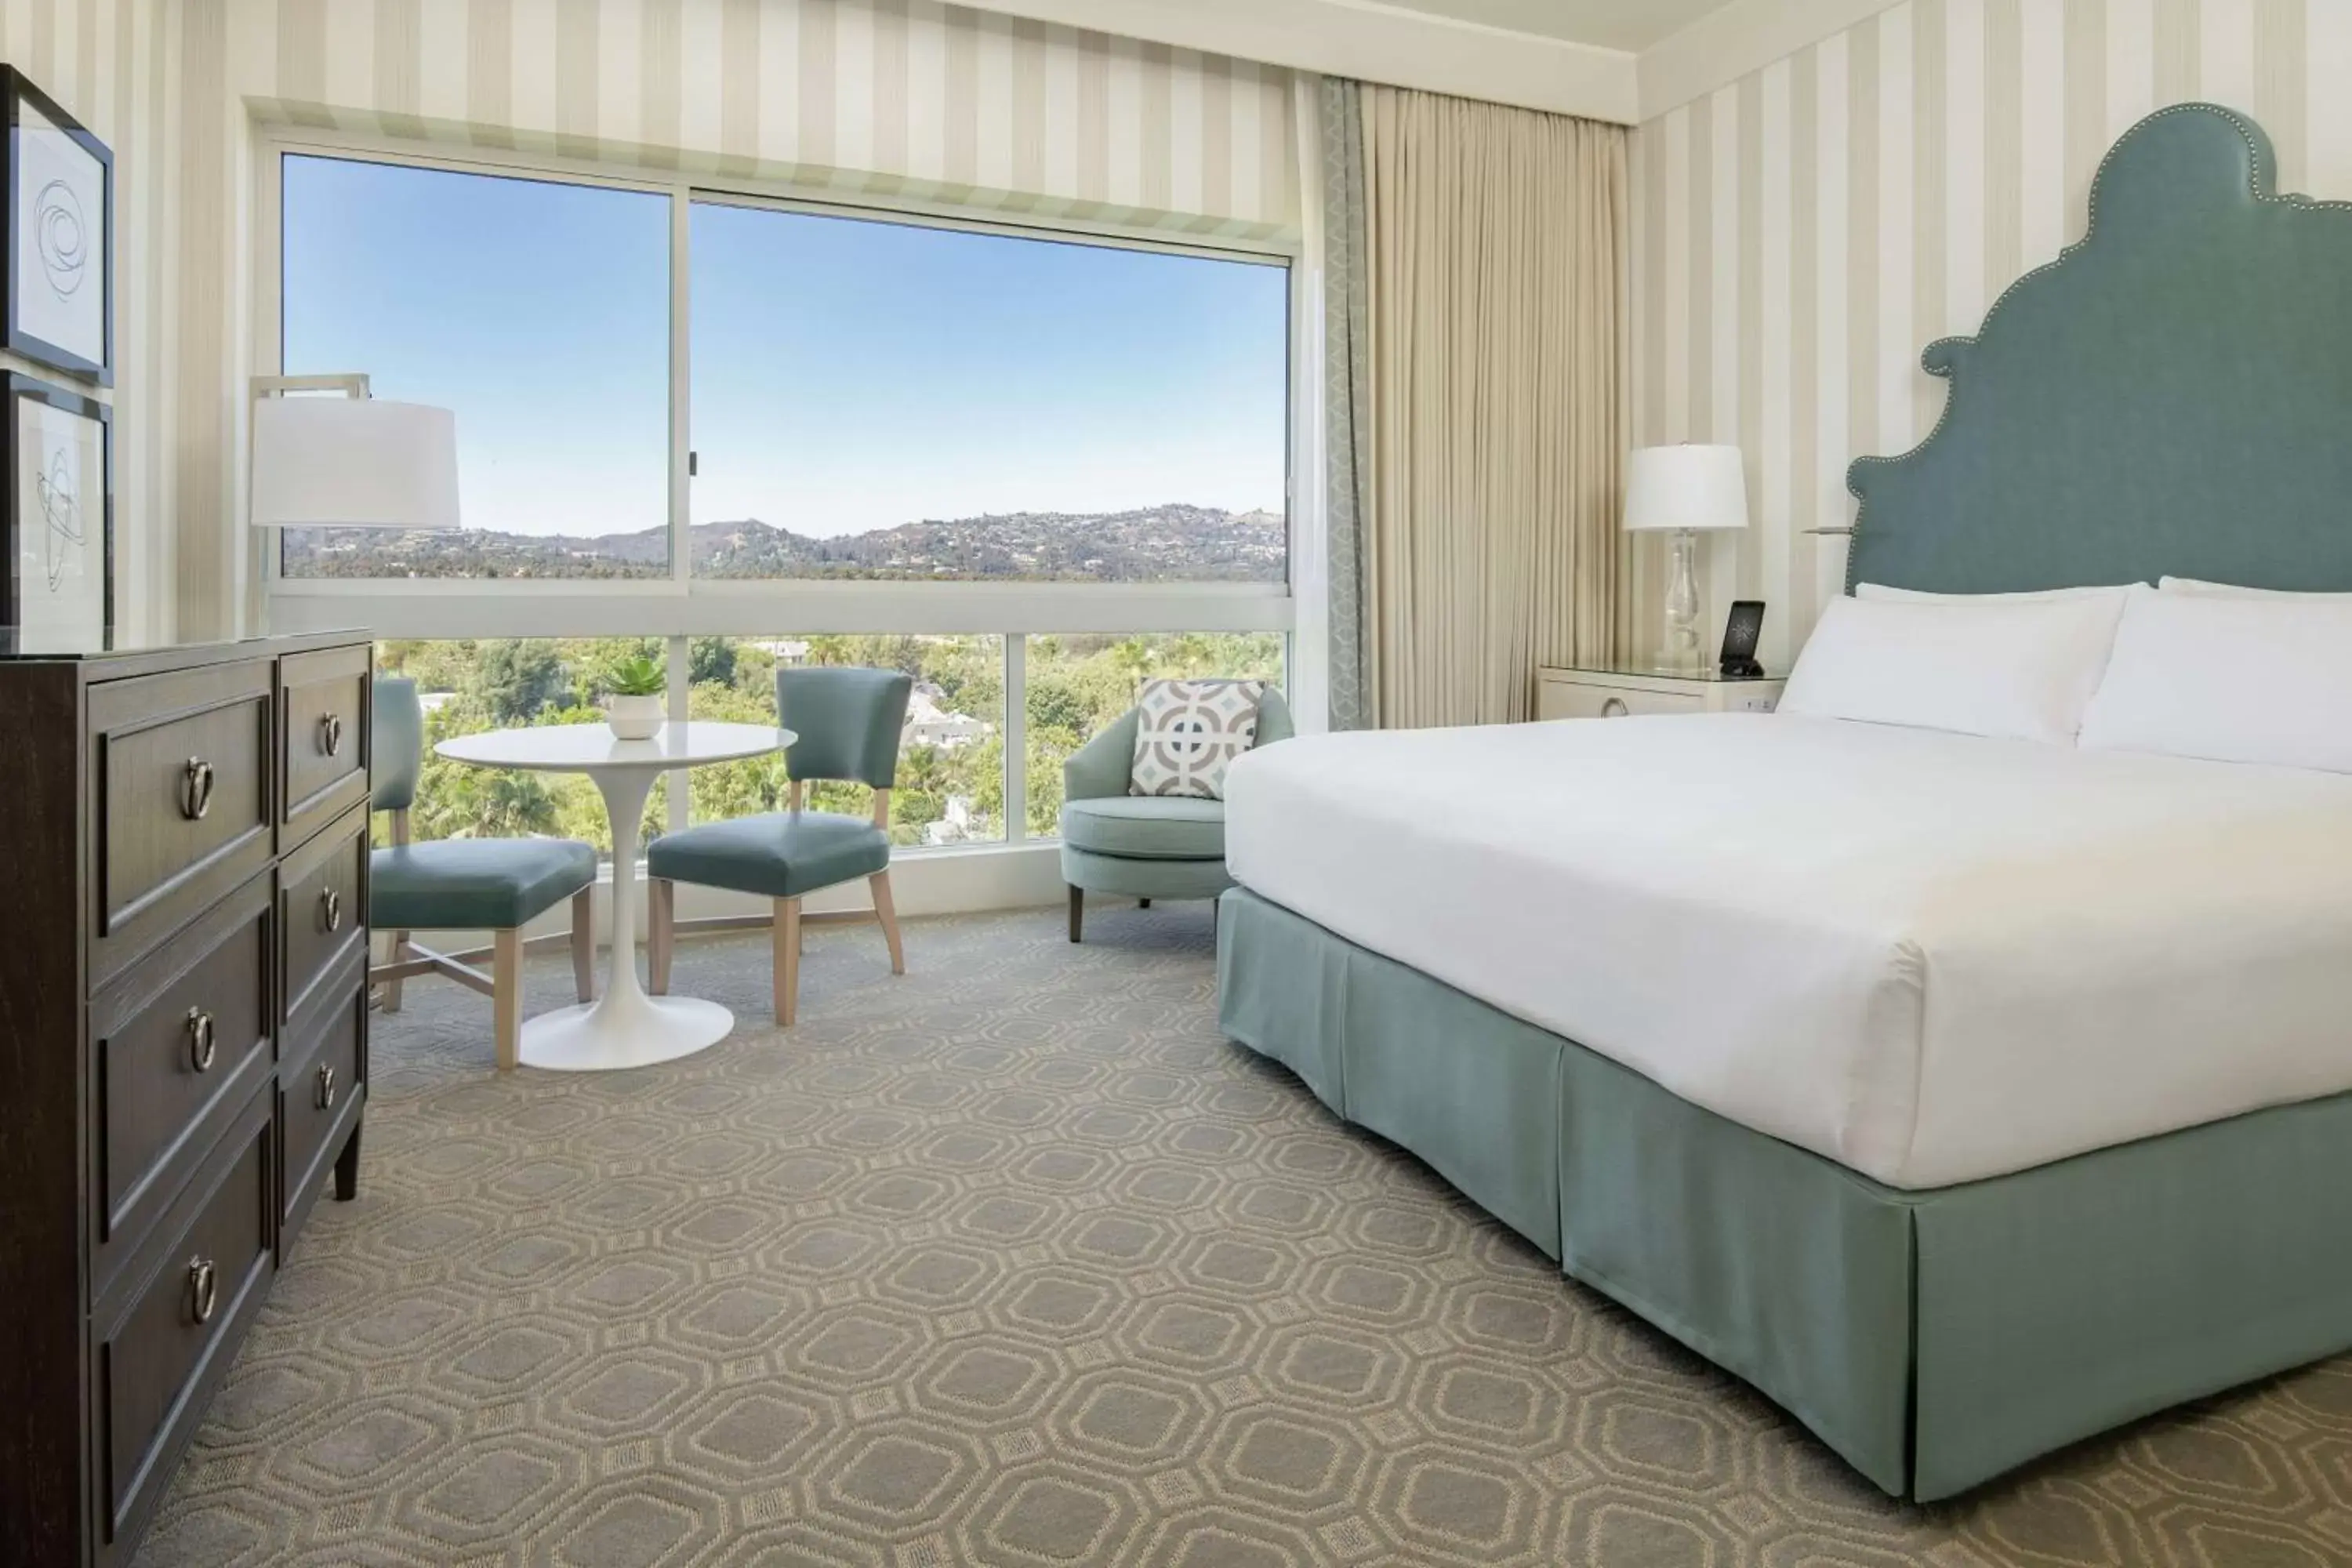 Bedroom in The Beverly Hilton